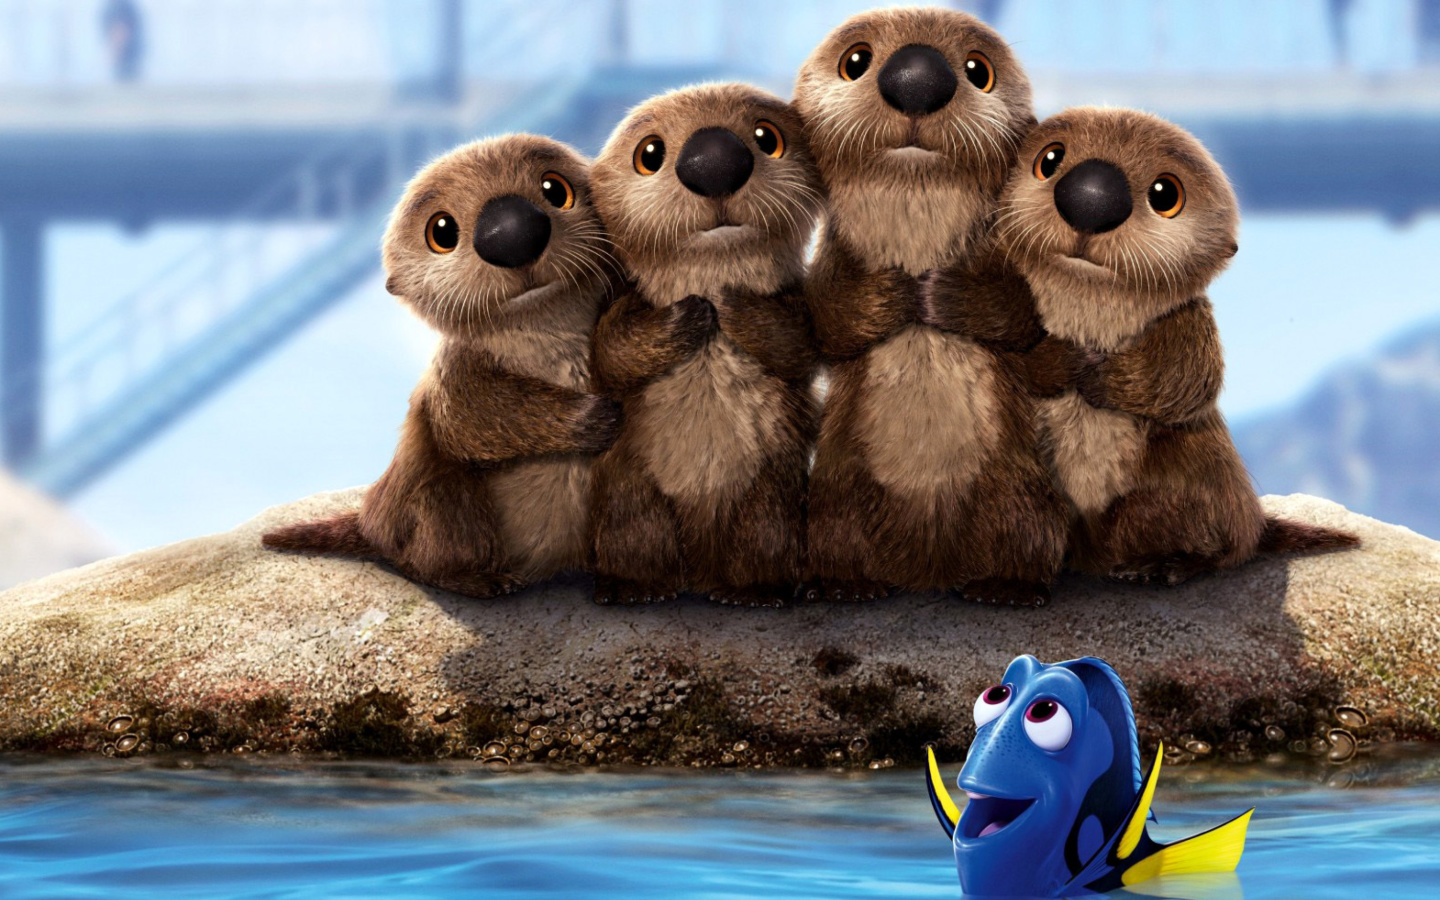 Finding Dory 3D Film with Beavers screenshot #1 1440x900